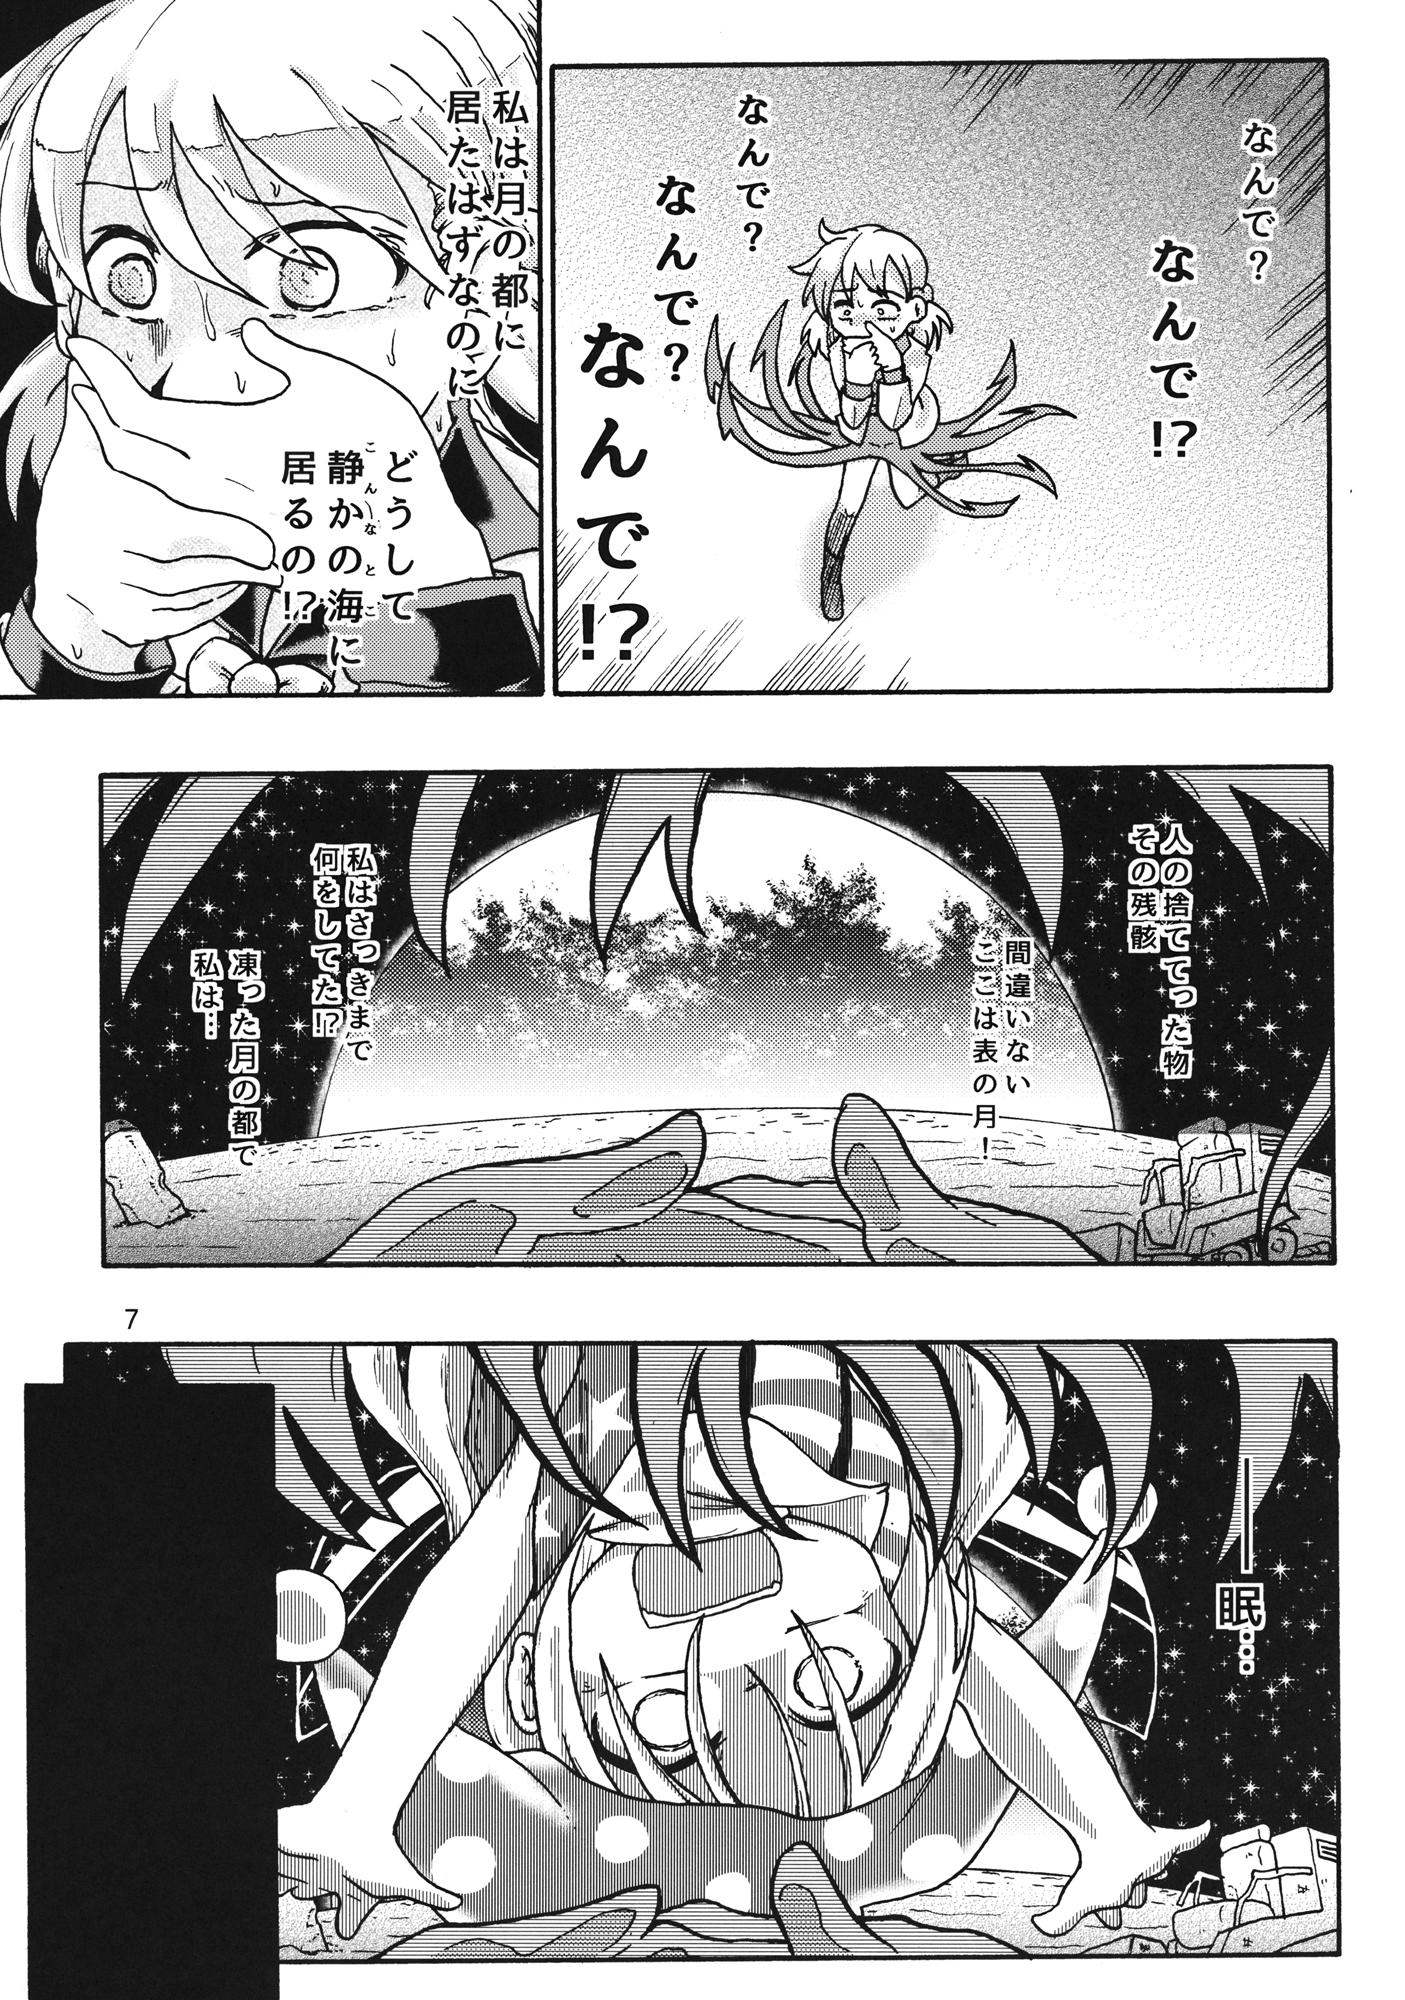 Interracial Sex Creeping! - Touhou project Step Sister - Page 6